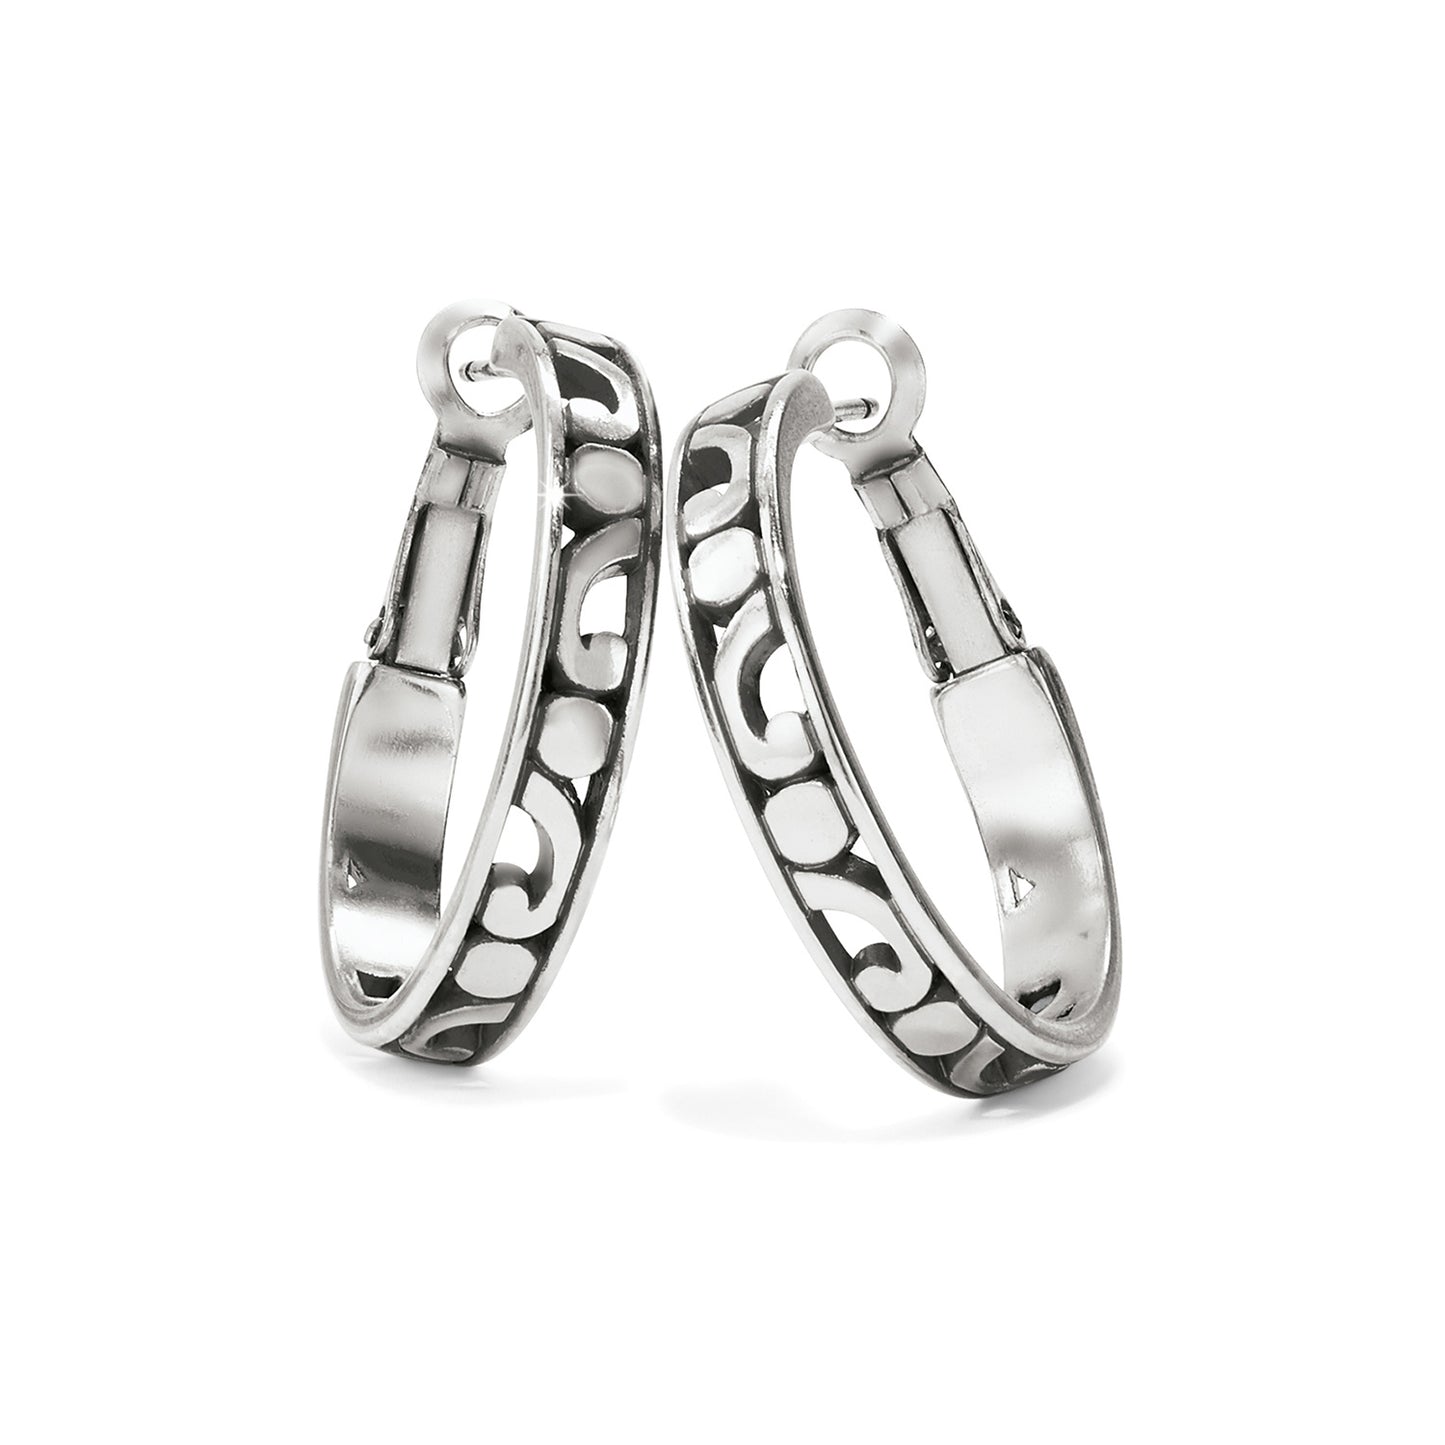 Contempo Small Hoop Earrings - JE9710